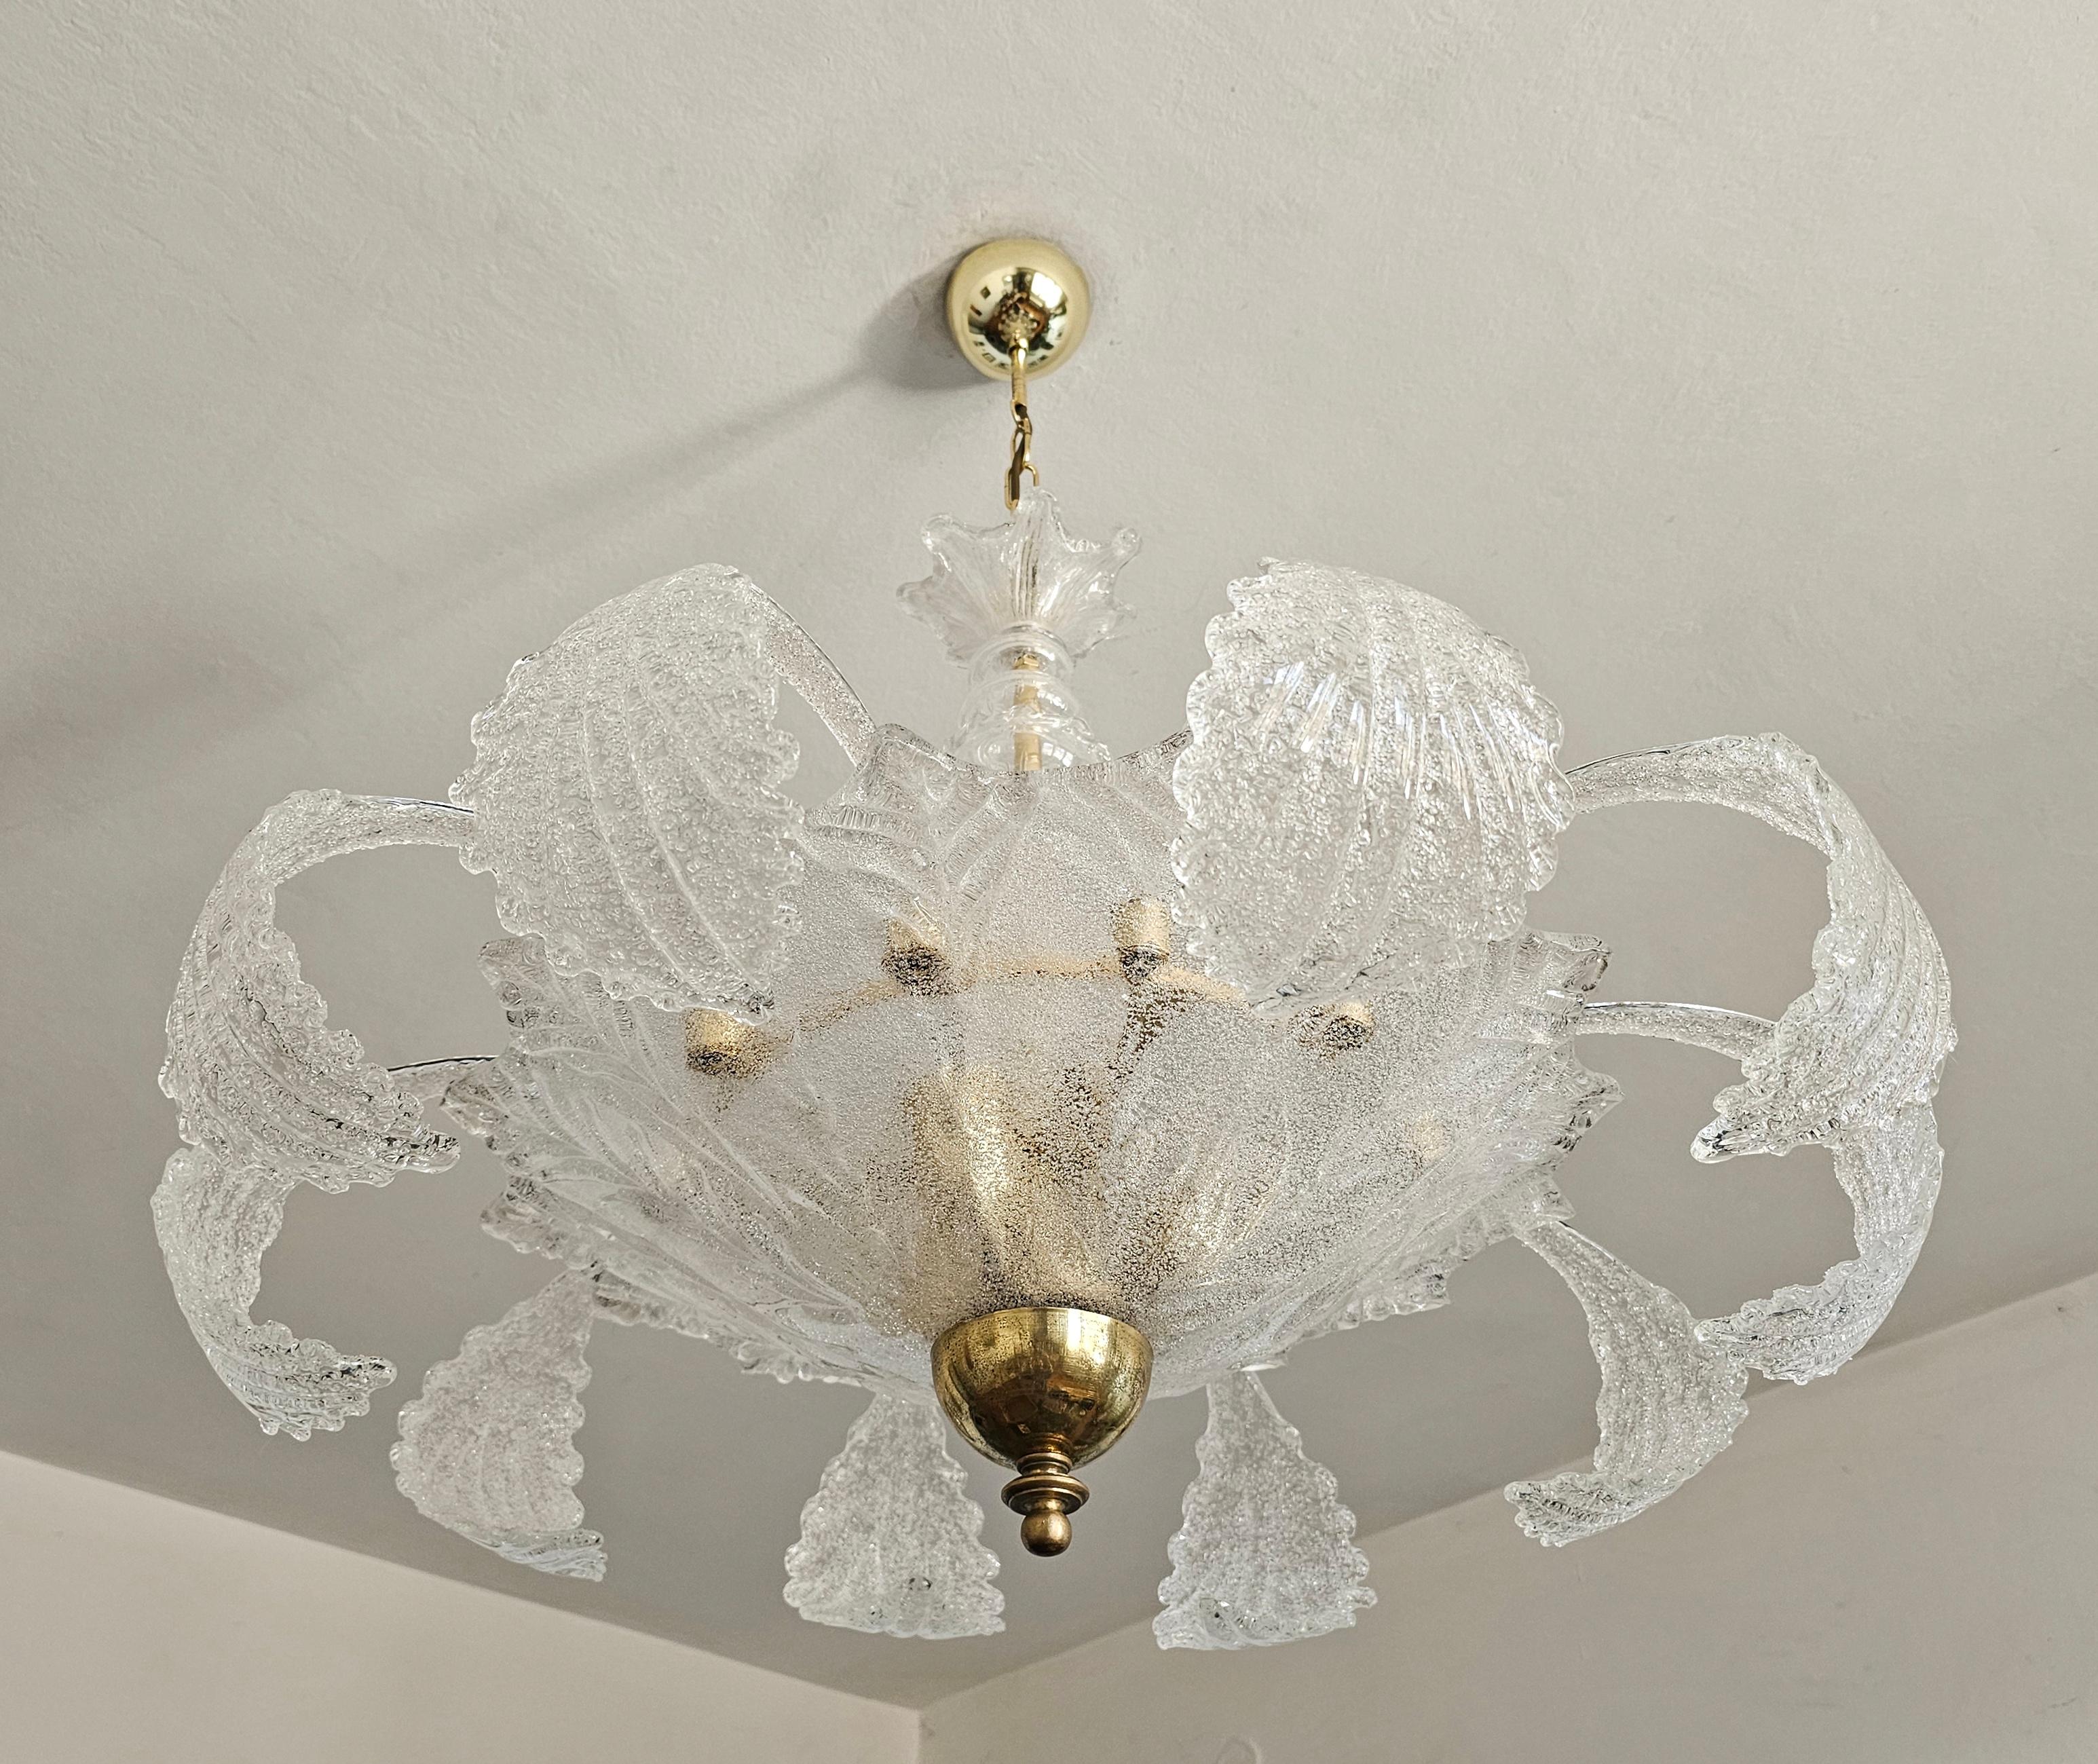 Italian Art Deco Chandelier in style of Barovier & Toso, 10 Murano leaves, Italy 1950s For Sale